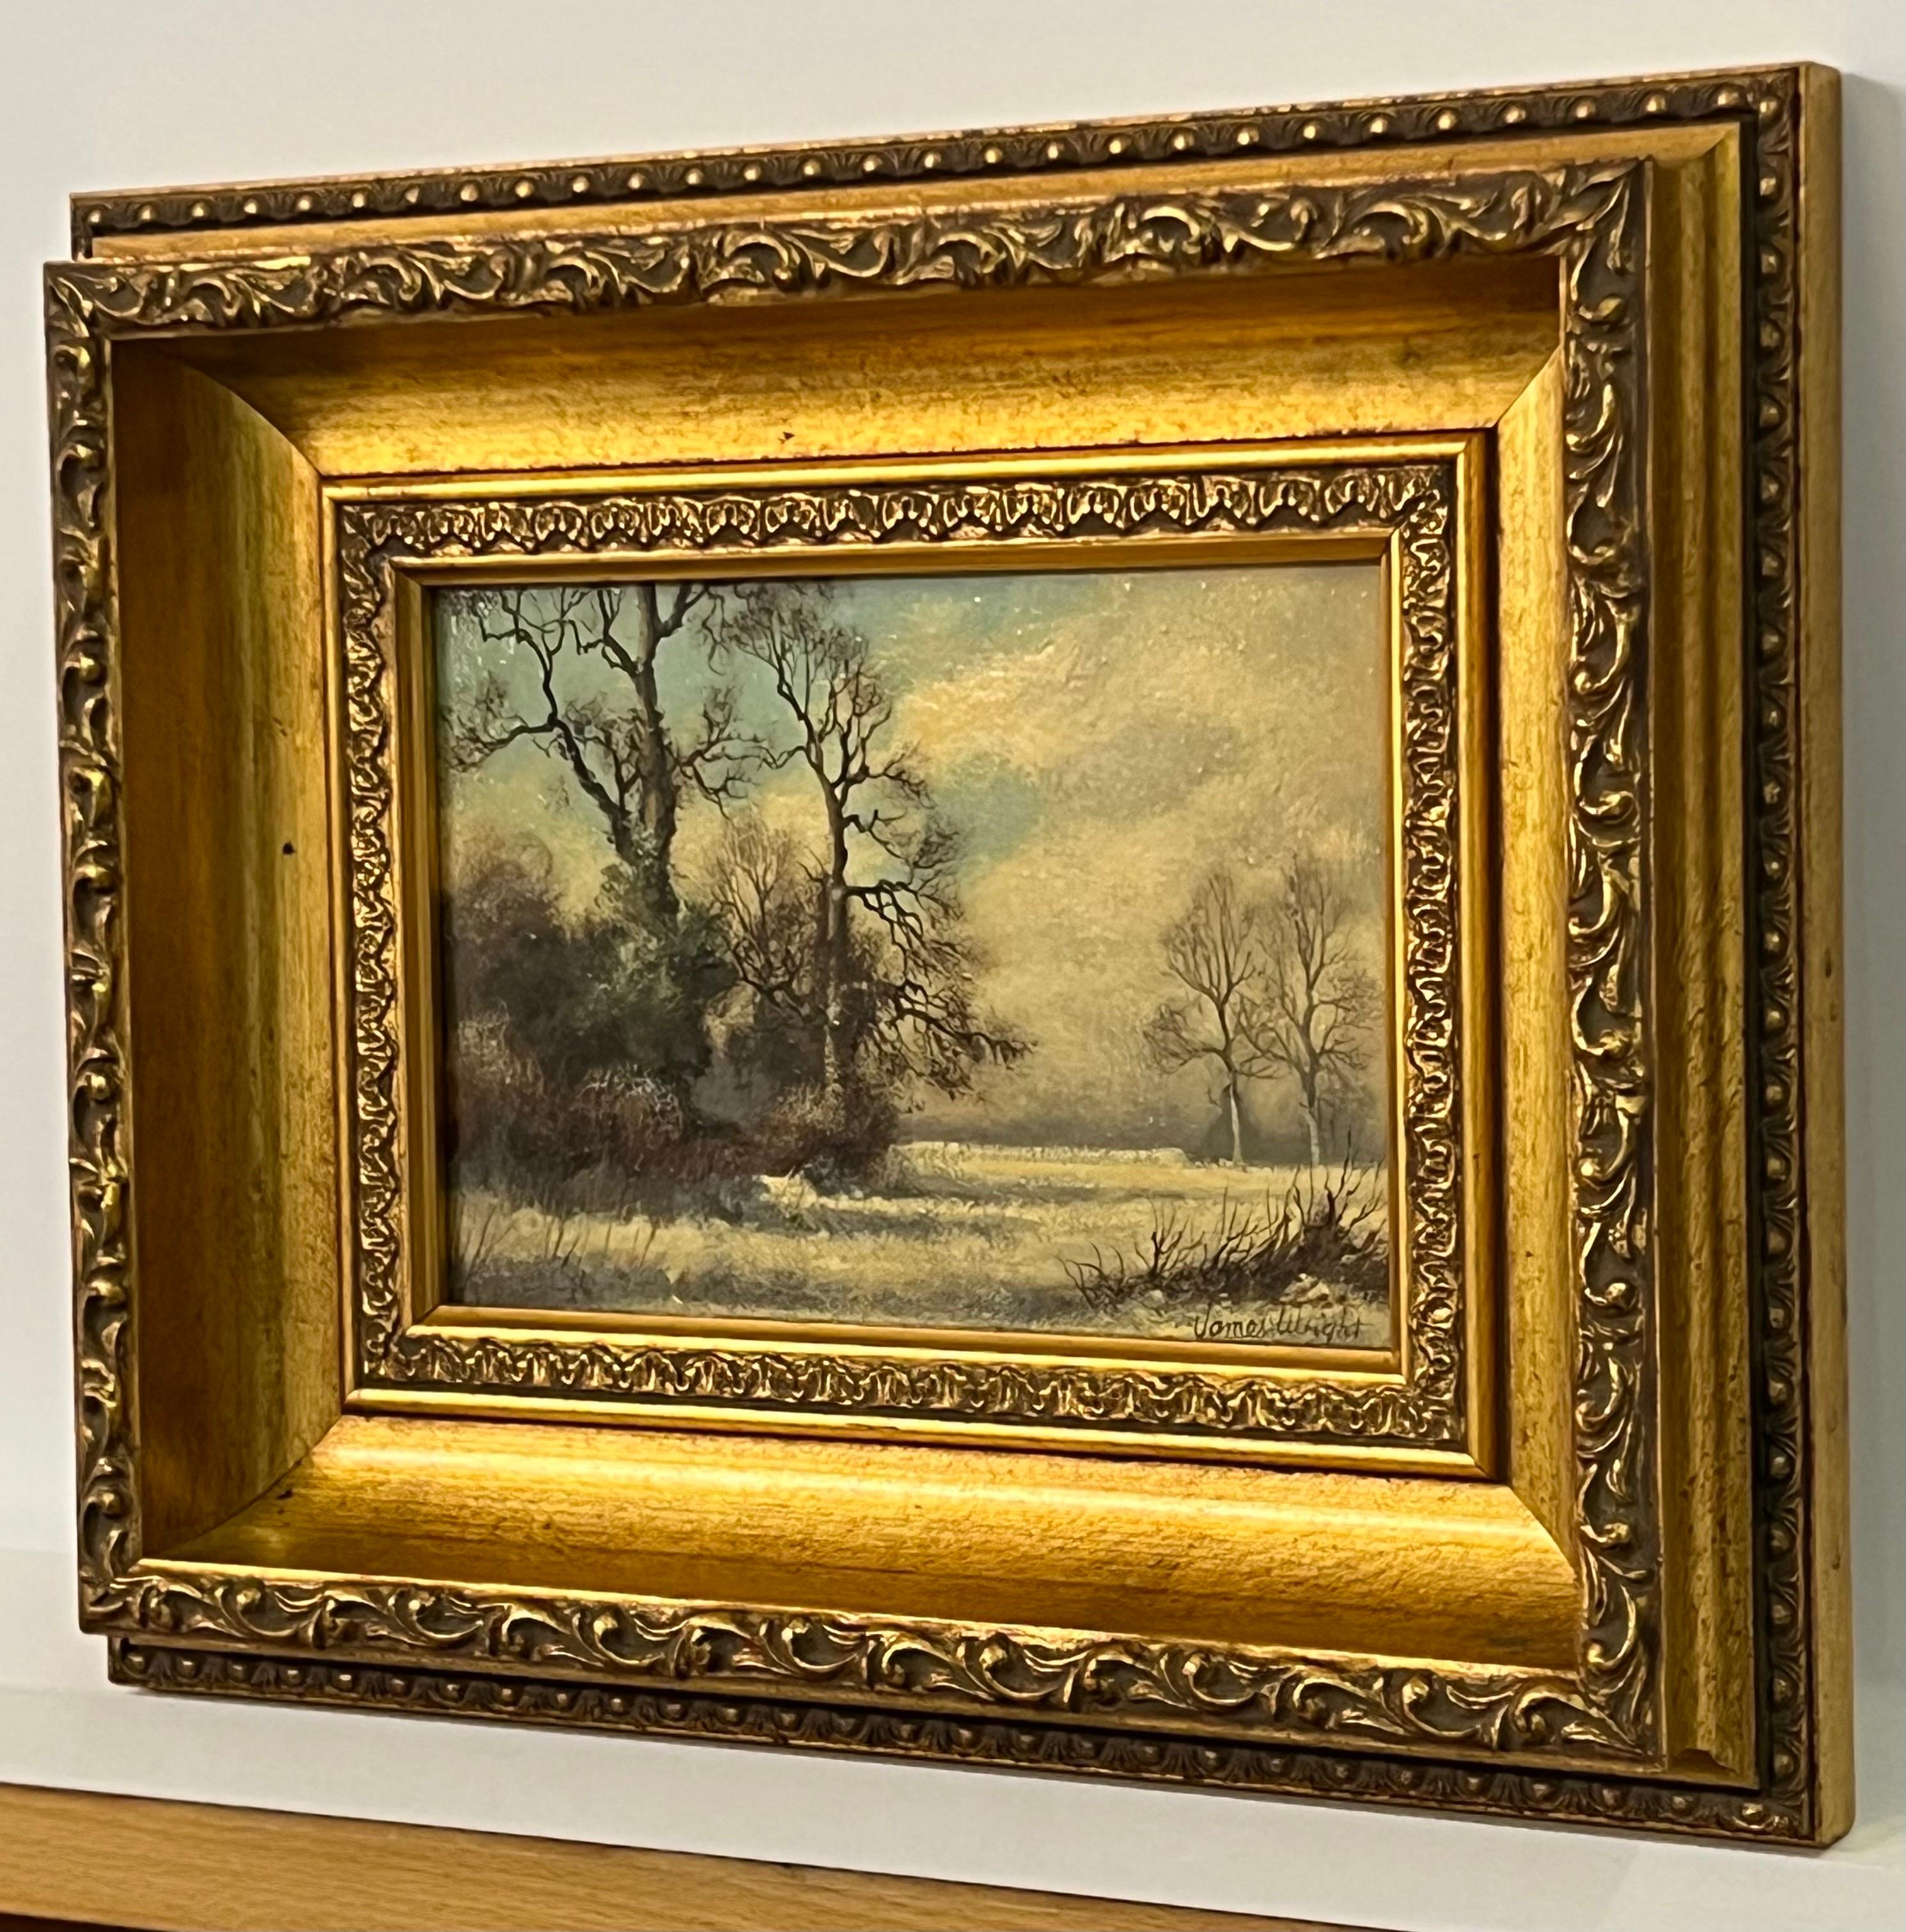 Winter Landscape Snow Scene in the English Countryside by 20th Century Artist - Romantic Painting by James Wright